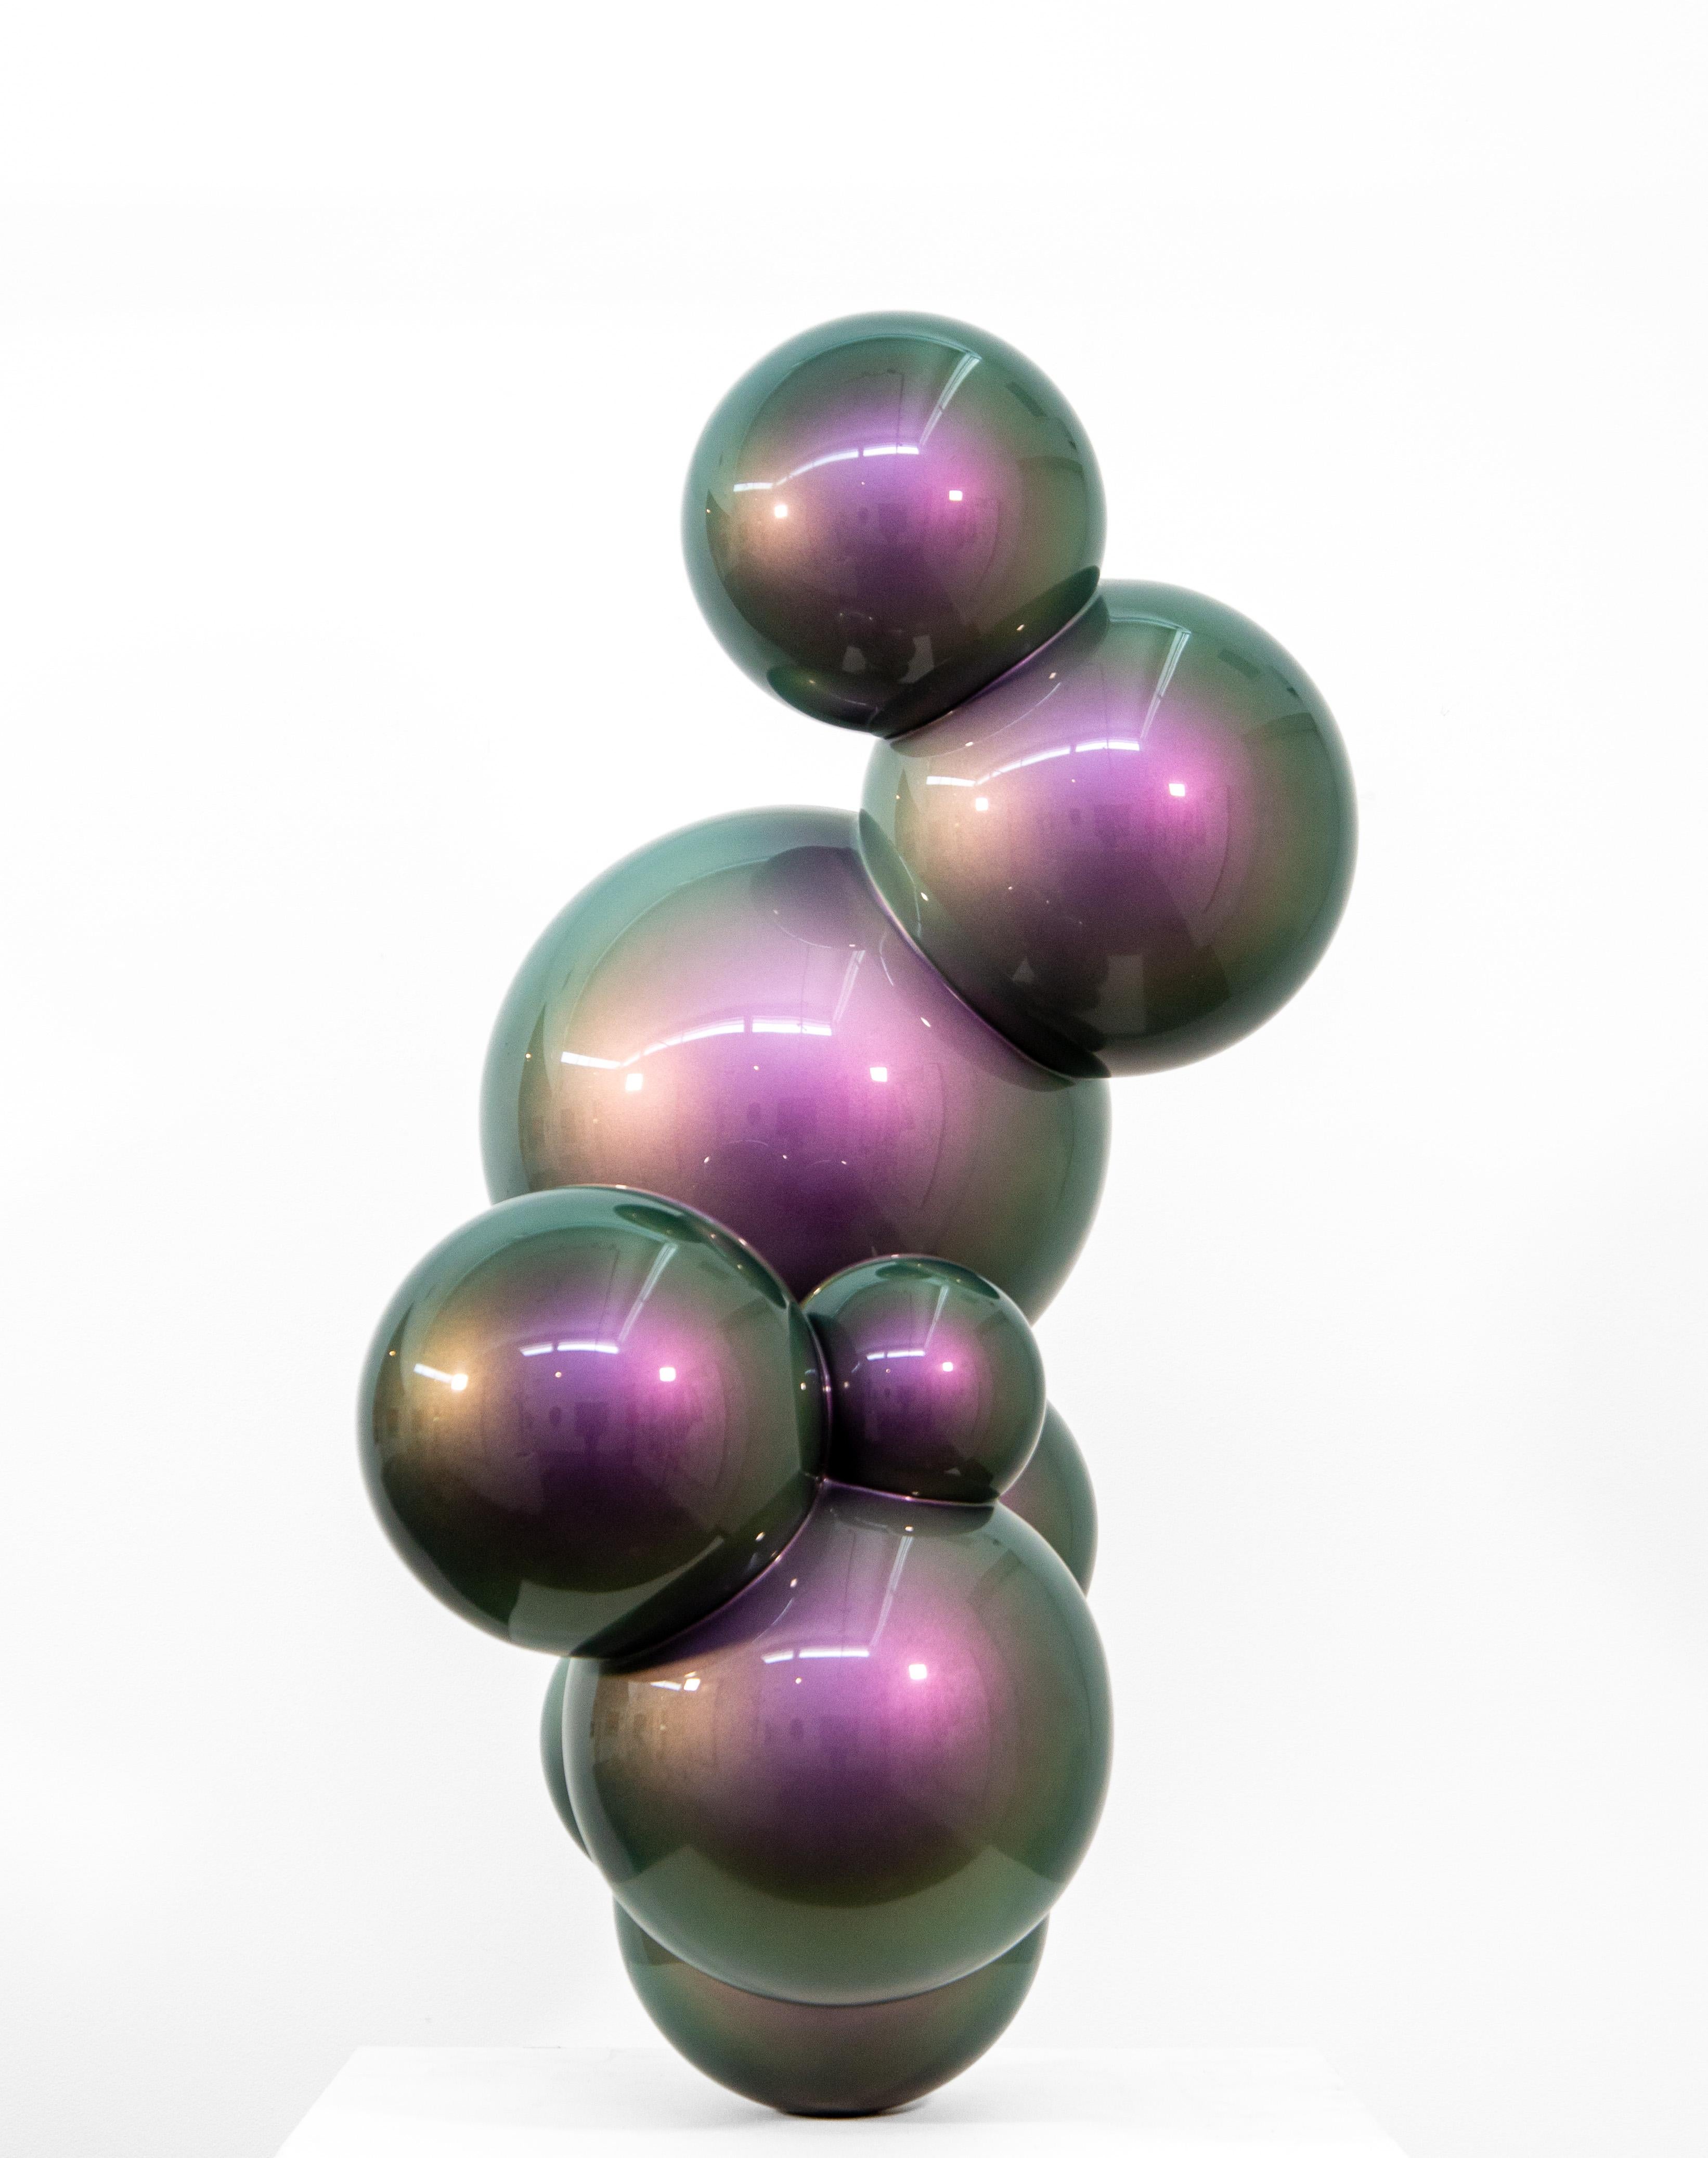 From his foundry in a Calgary warehouse, Alexander Caldwell creates compelling and cool modern sculptures. This minimalist piece—a series of linked stainless-steel spheres of different sizes— appears almost molecular in form. Coated in a shiny